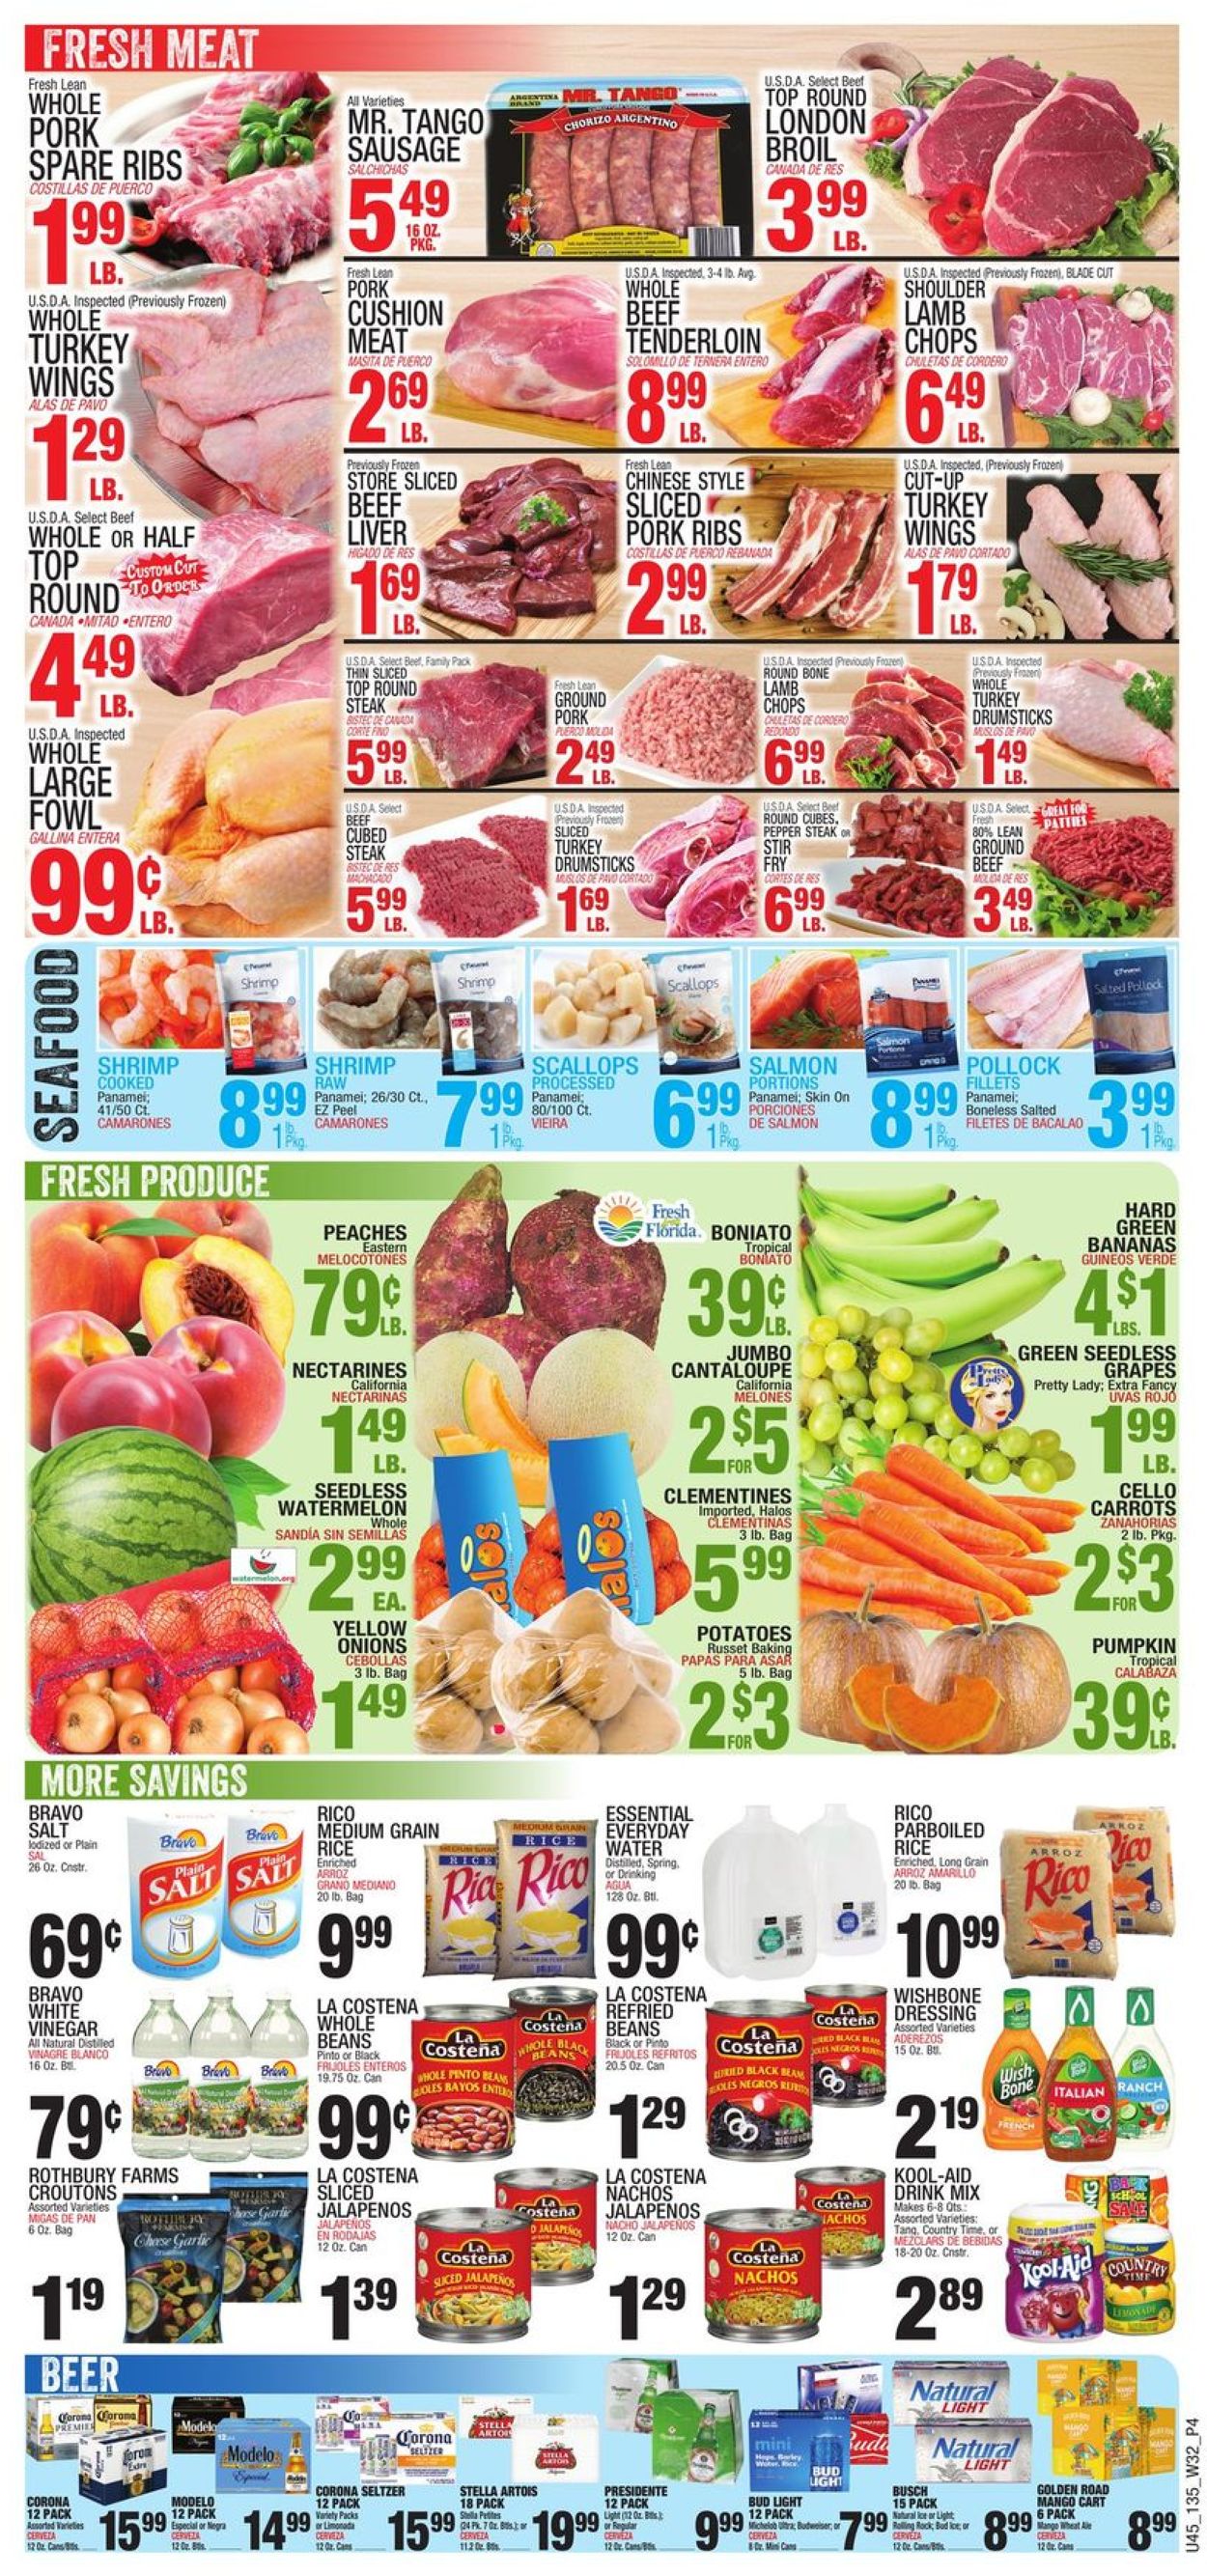 Bravo Supermarkets Current weekly ad 08/05 - 08/11/2021 [4] - frequent ...